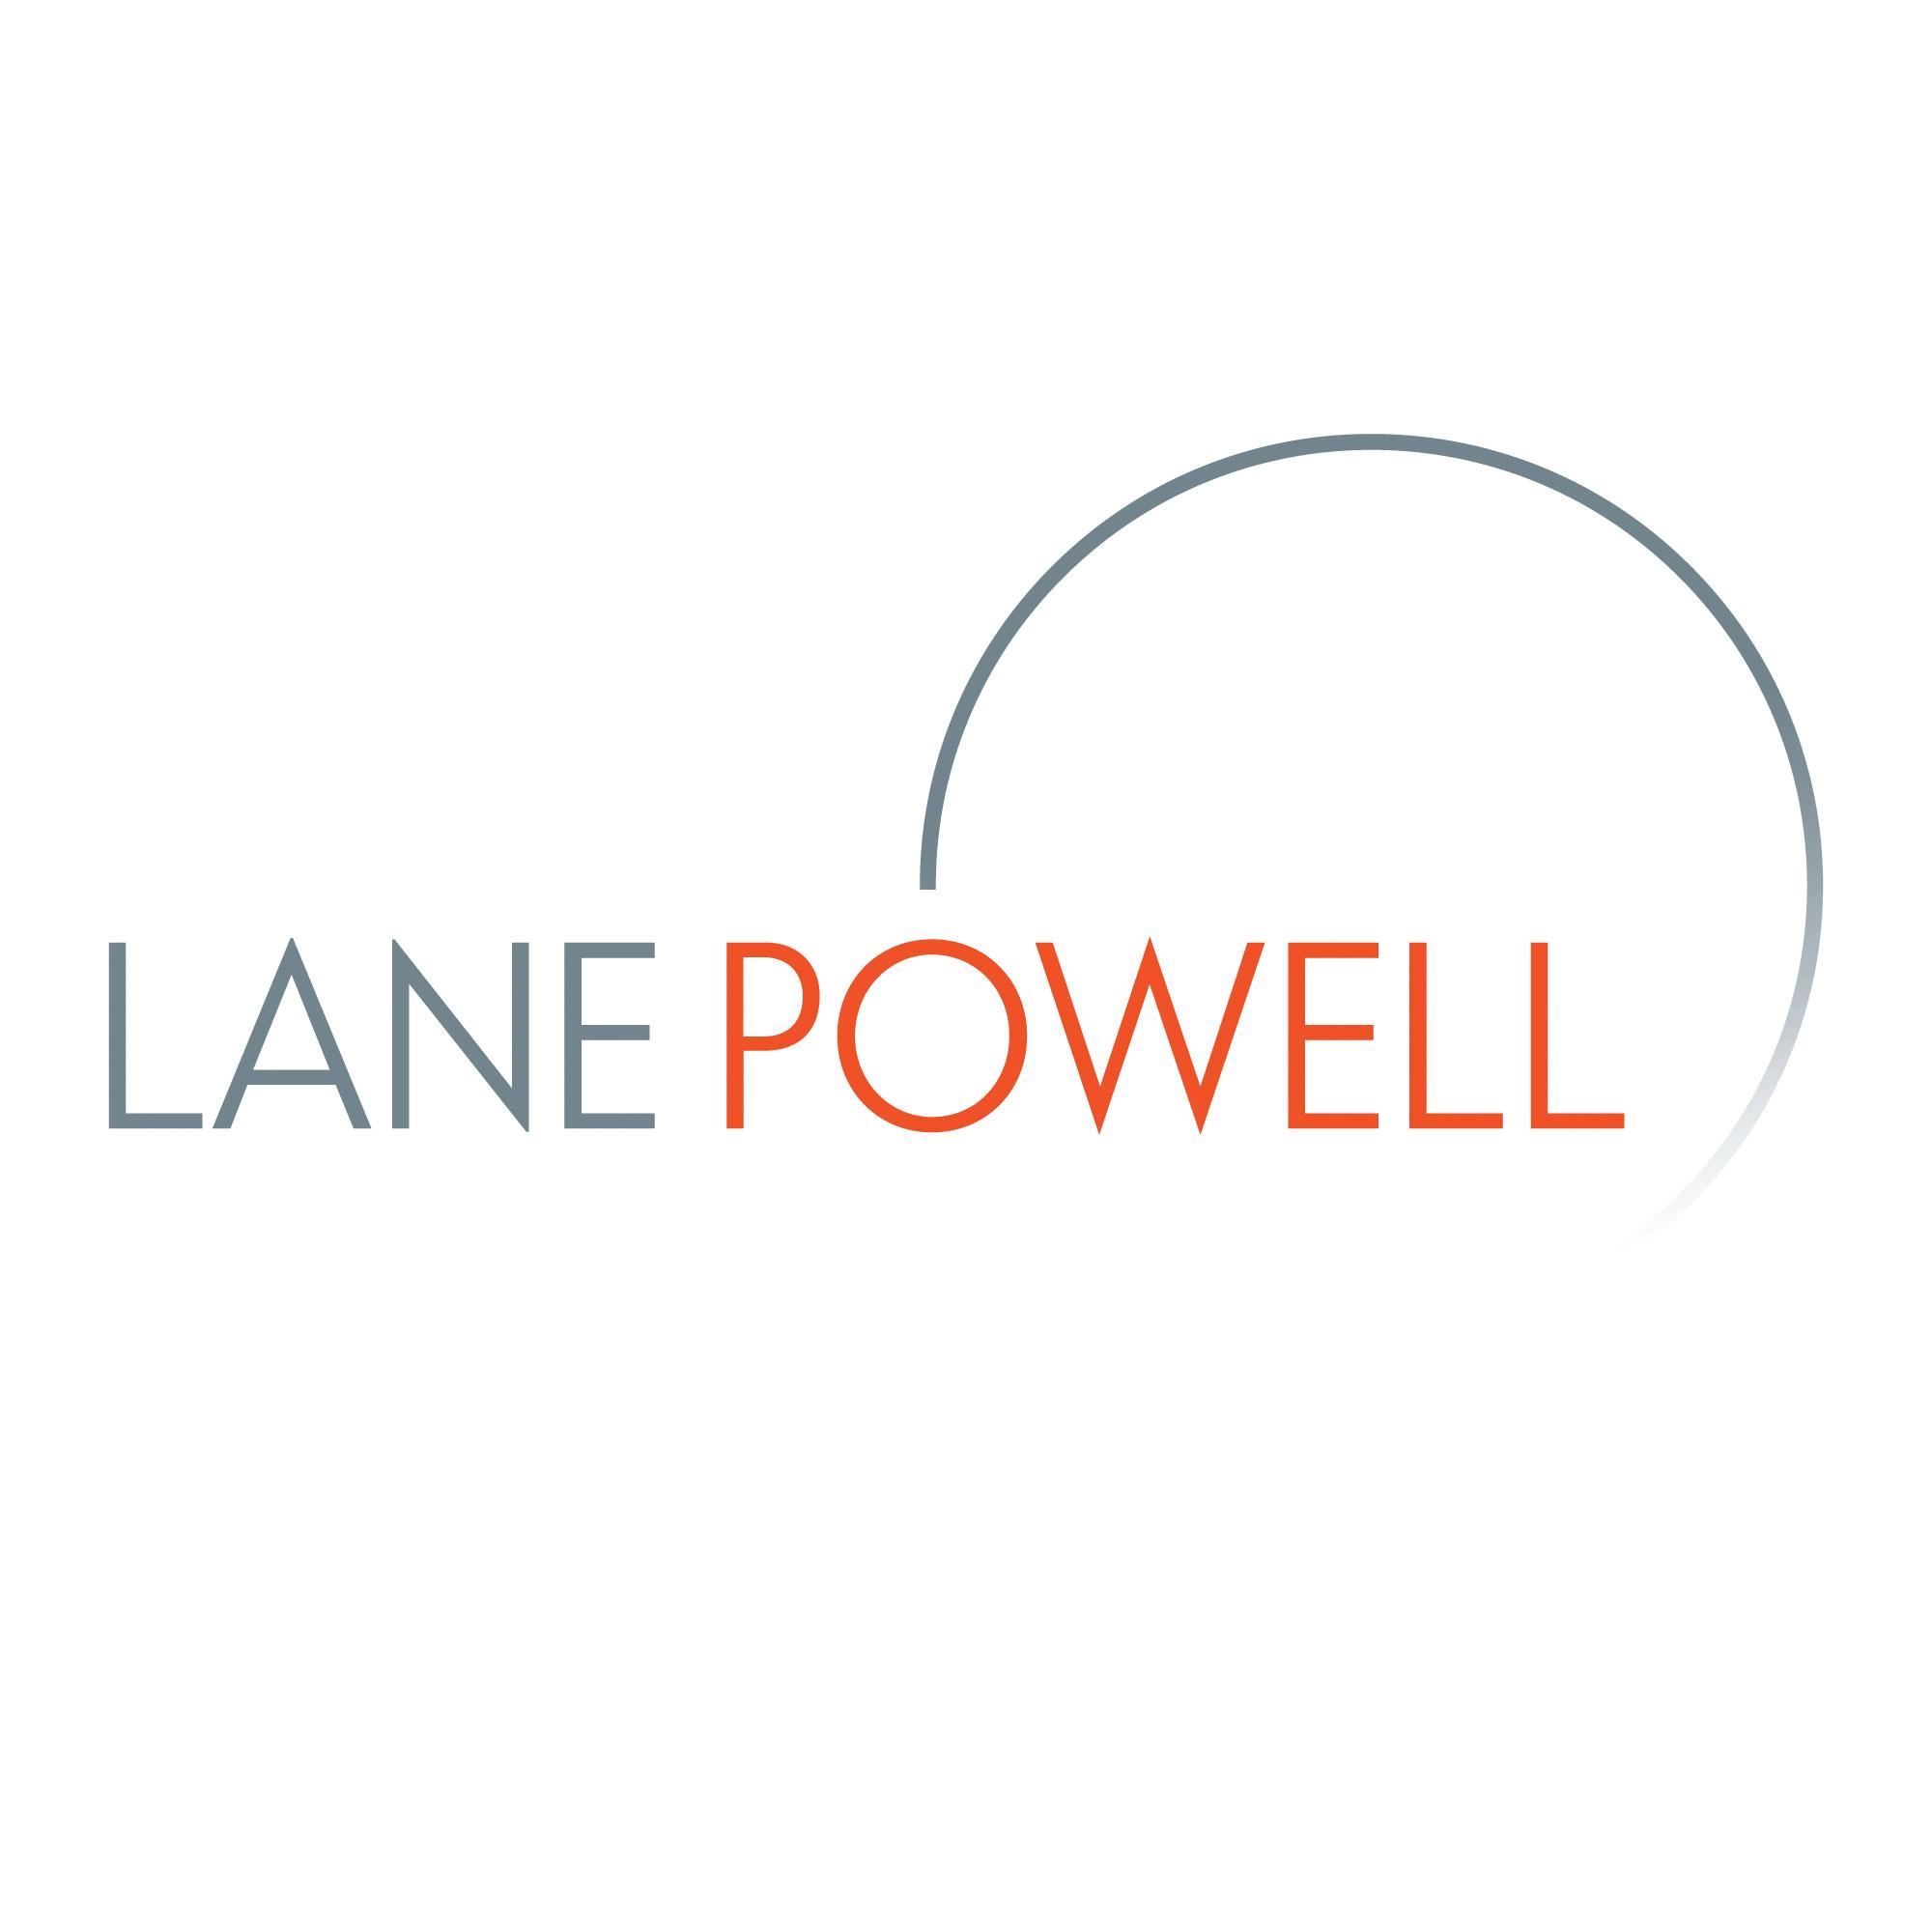 Lane Powell logo. The name Lane is gray and the name Powell is orange. There is a gray circle around Powell, with the line originating from the letter O.